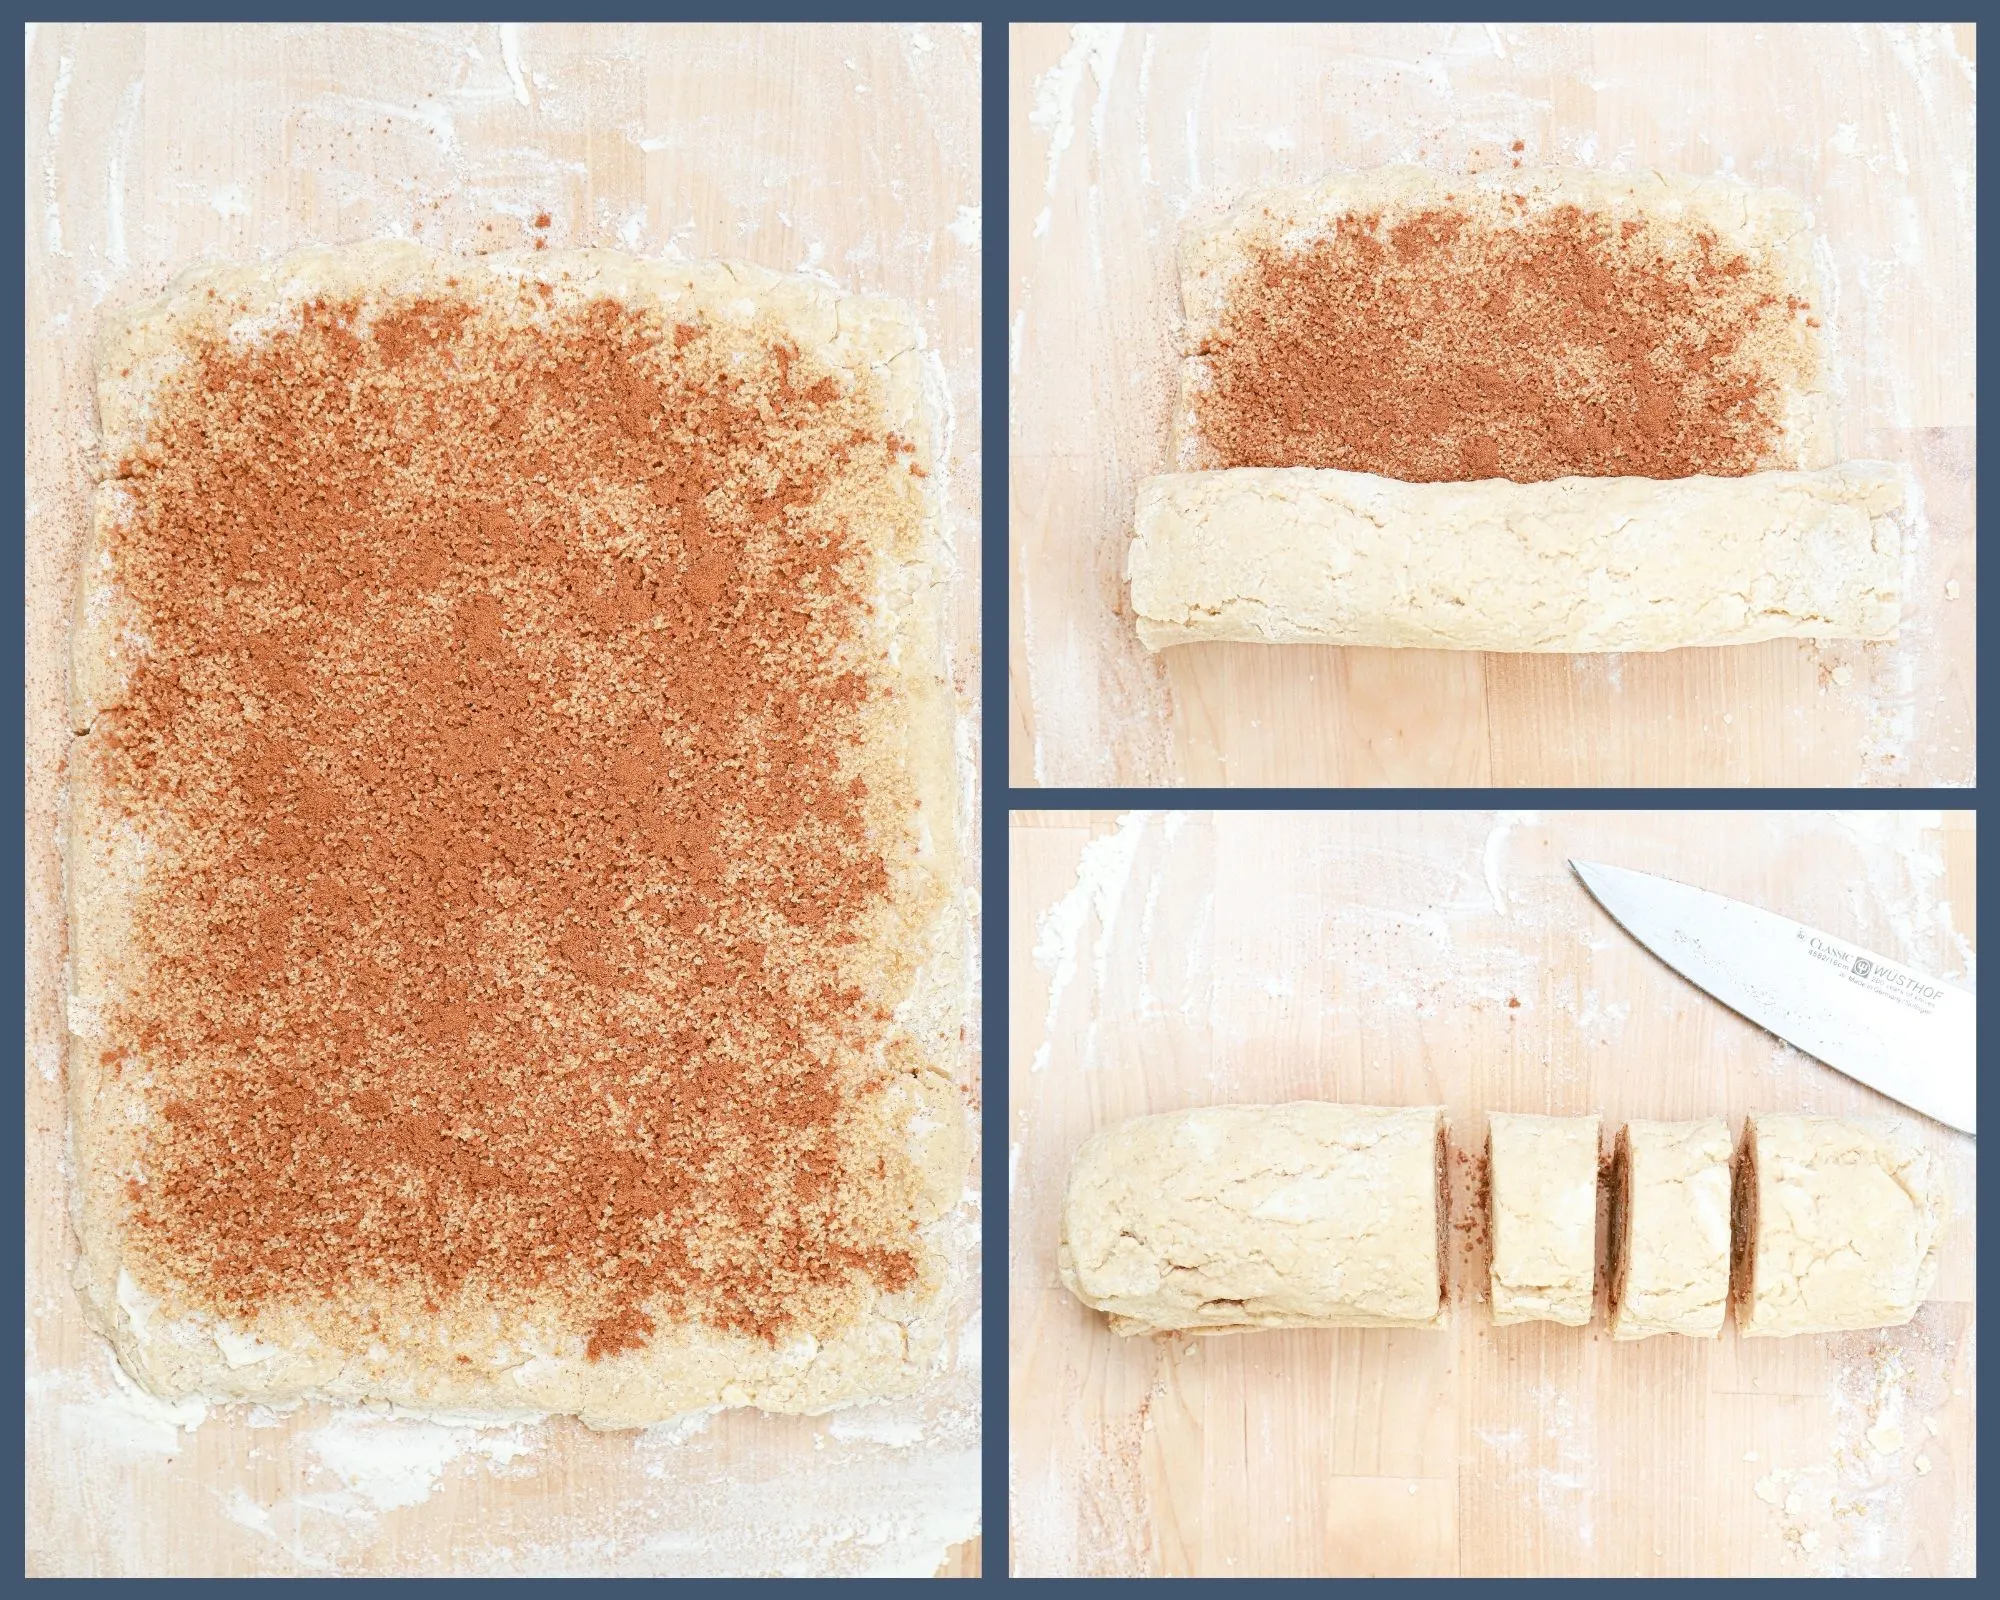 Collage of images showing the scone dough rolled out with filling, then half rolled into a log, and then cut into spirals.